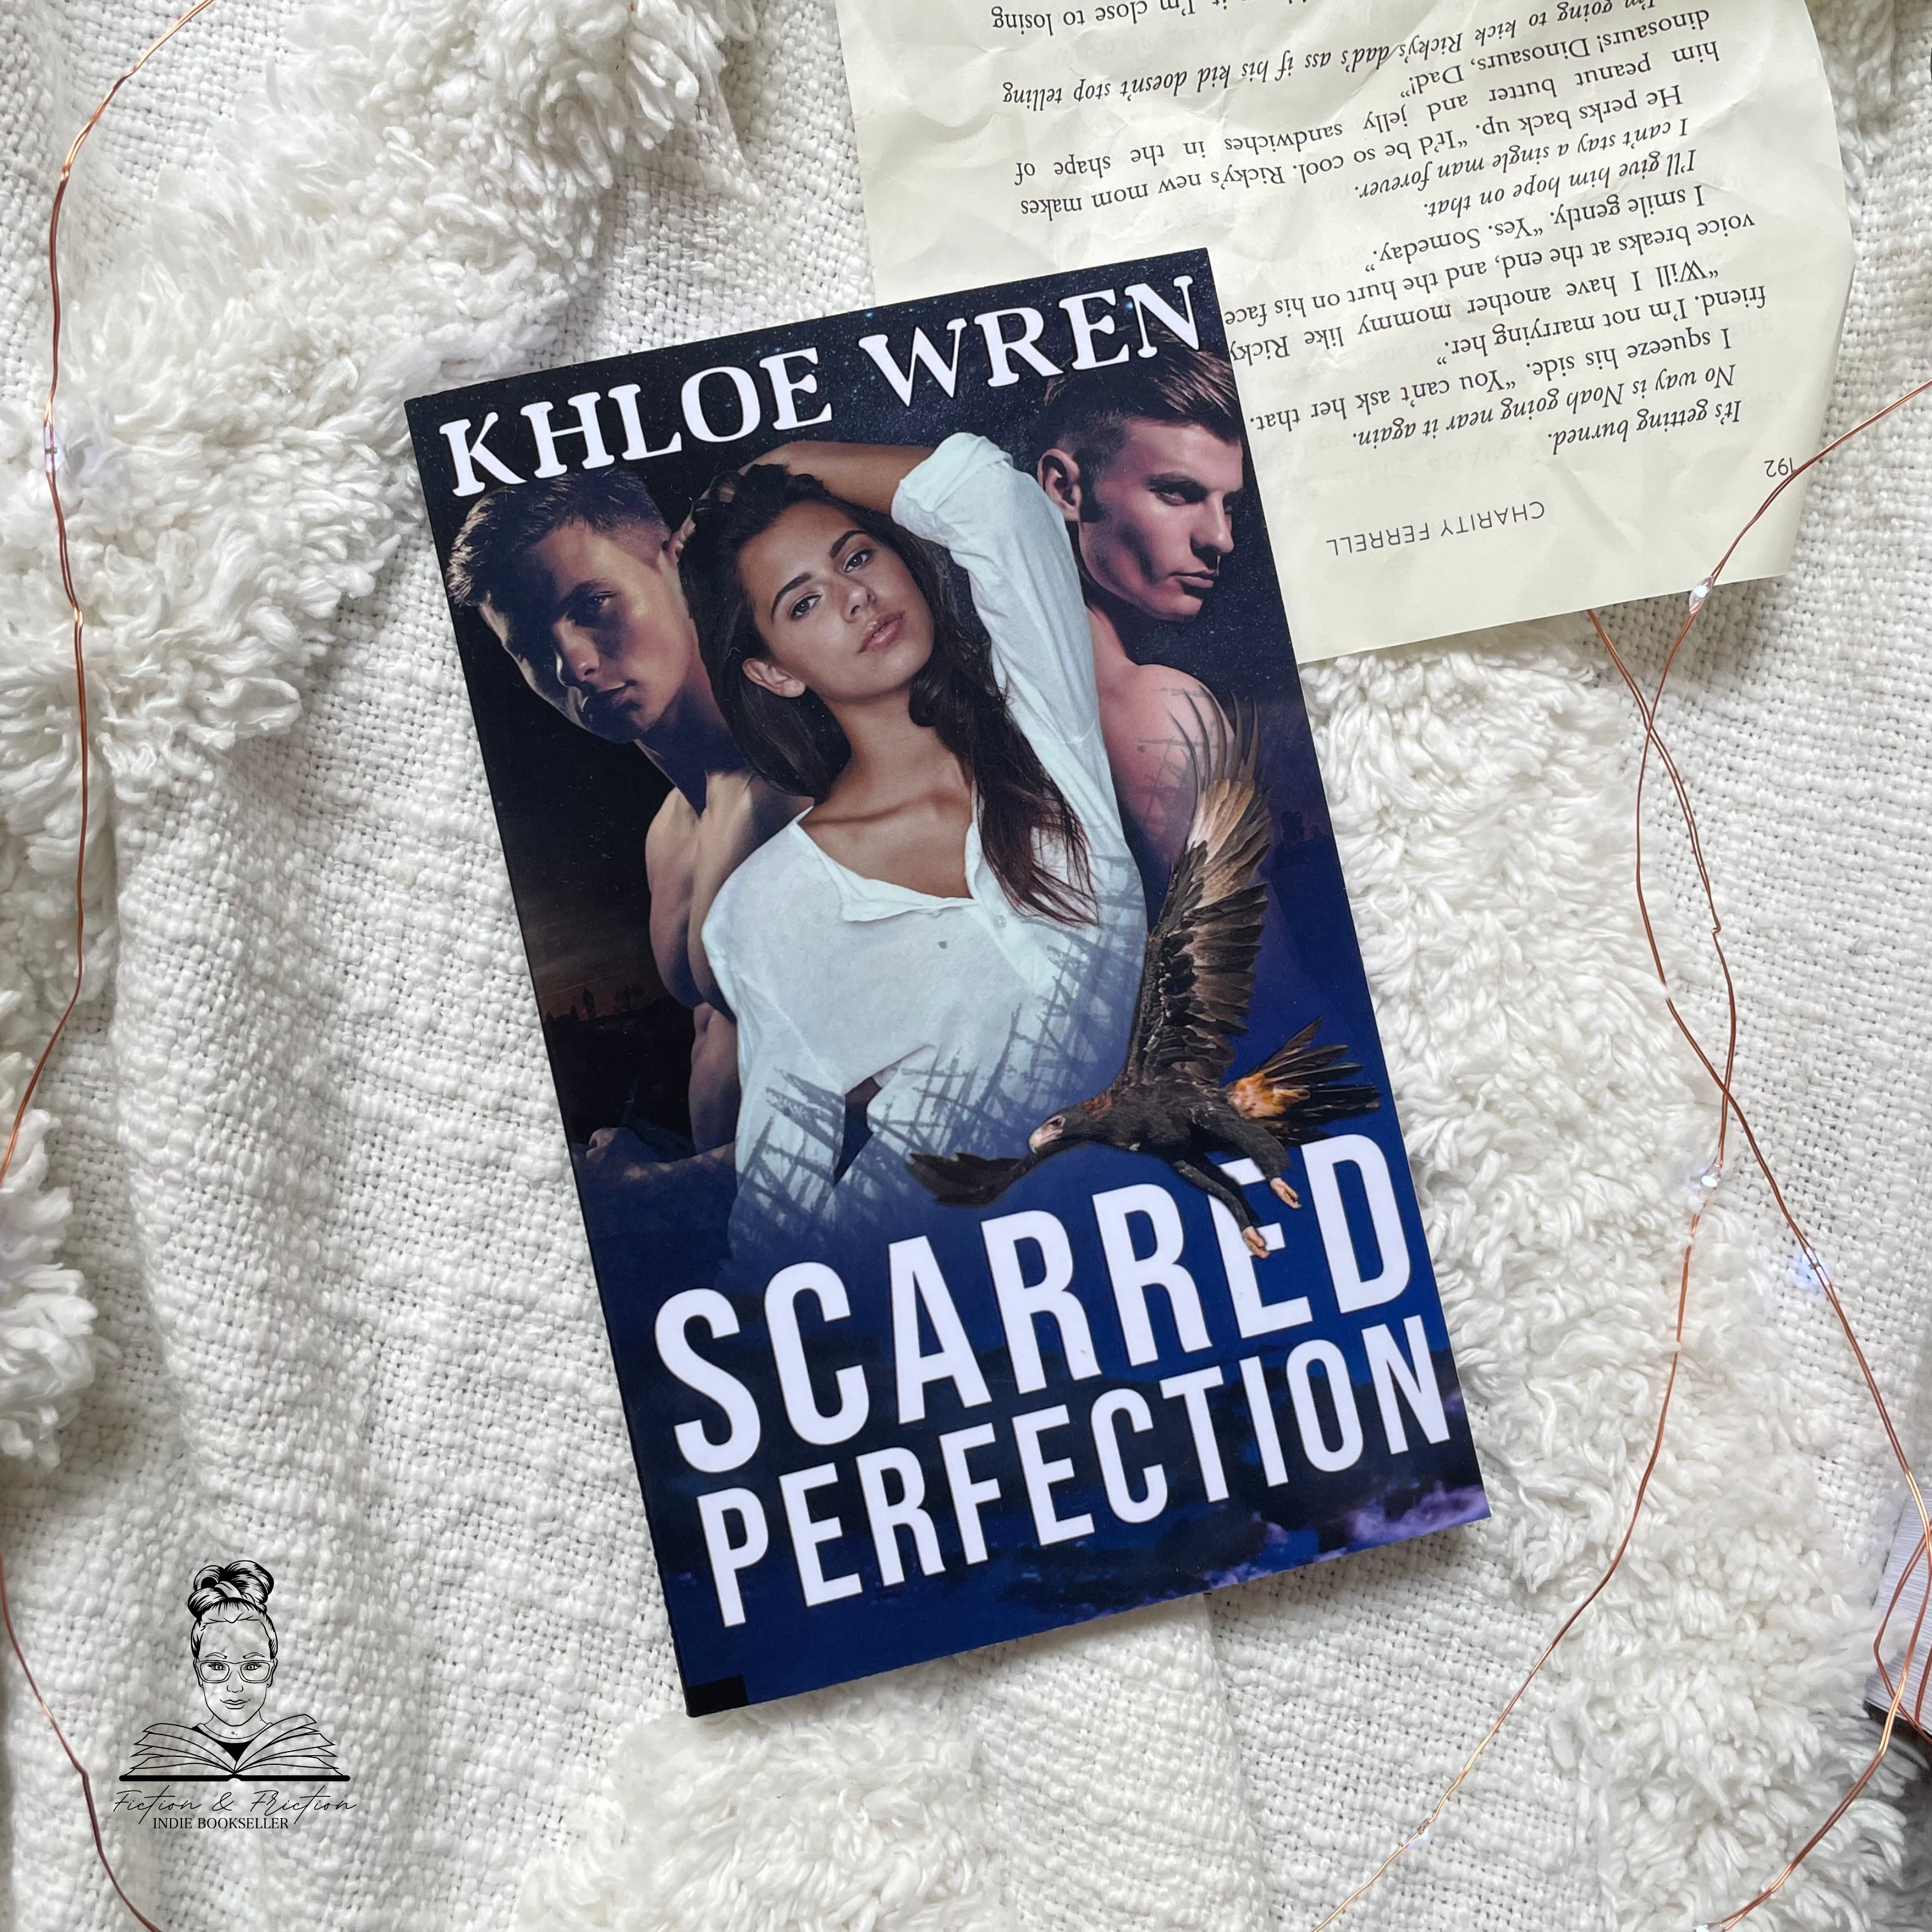 Scarred Perfection by Khloe Wren